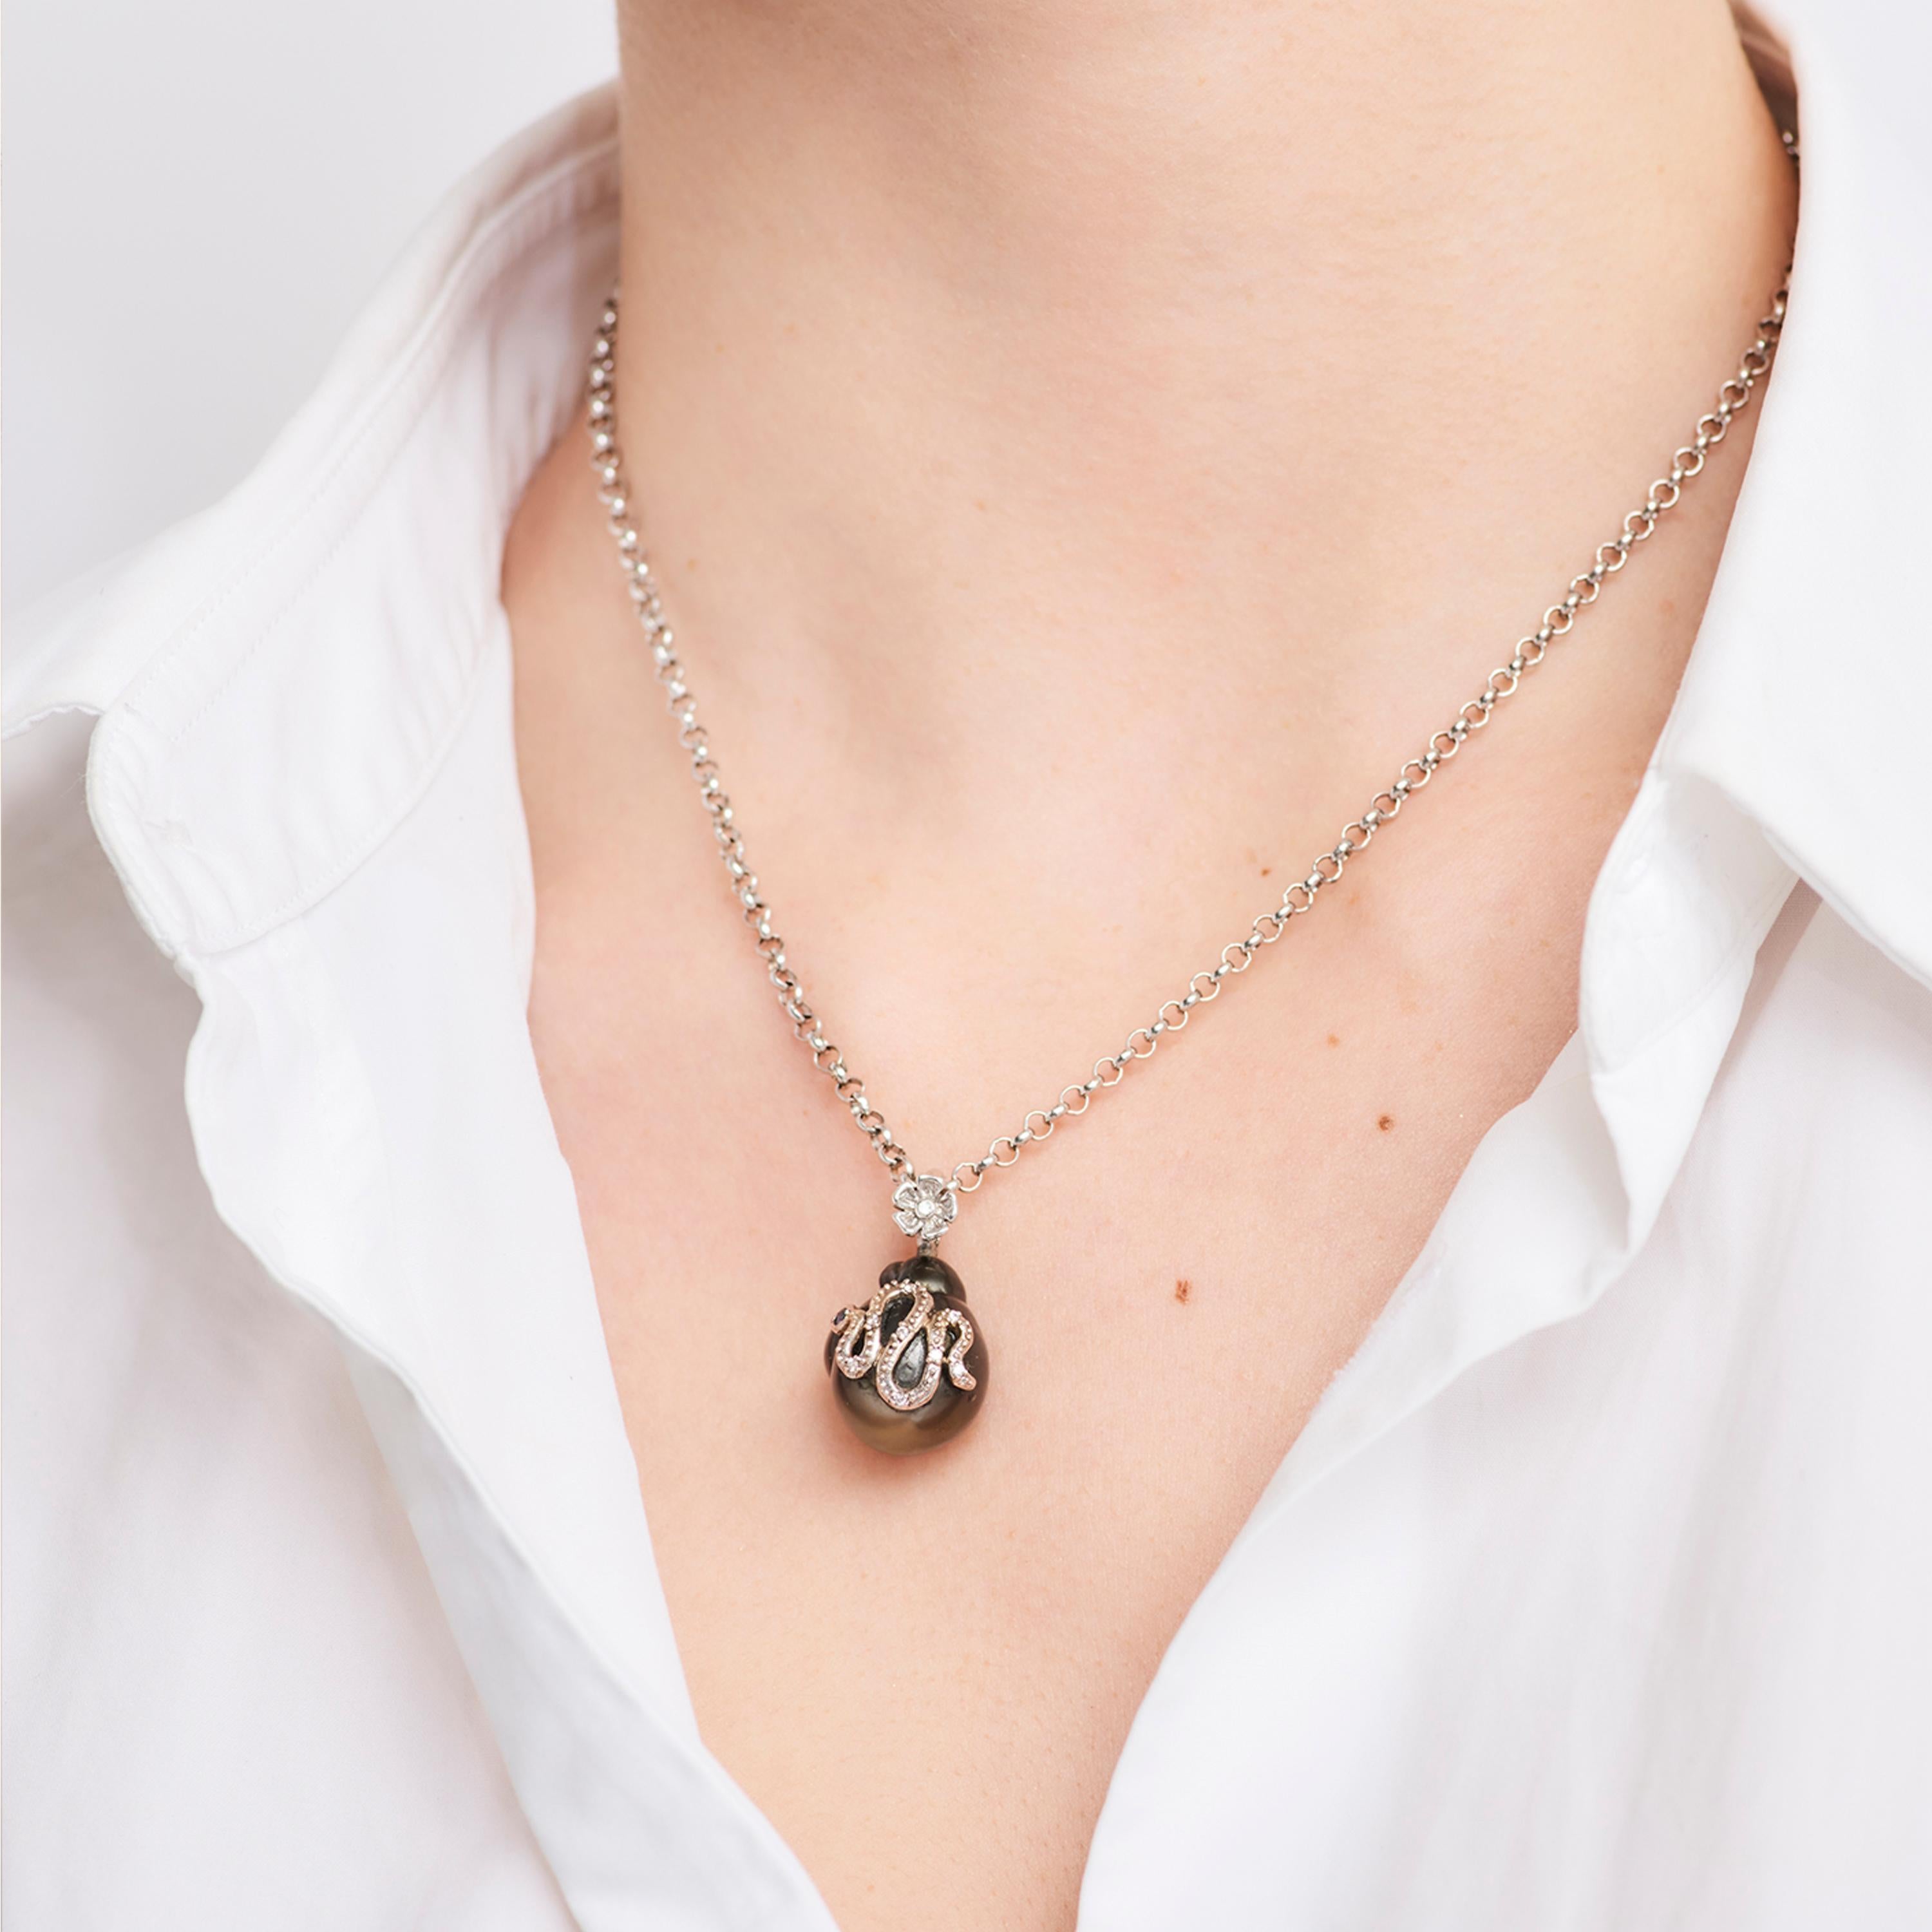 Stella Flame’s Baroque Tahitian Pearl Serpent Pendant is crafted from 18 karat white gold. A serpent embellished with white diamonds (0.2cts) and black diamonds (0.3cts) is set on a beautiful baroque Tahitian pearl. A delicate flower juxtaposes the